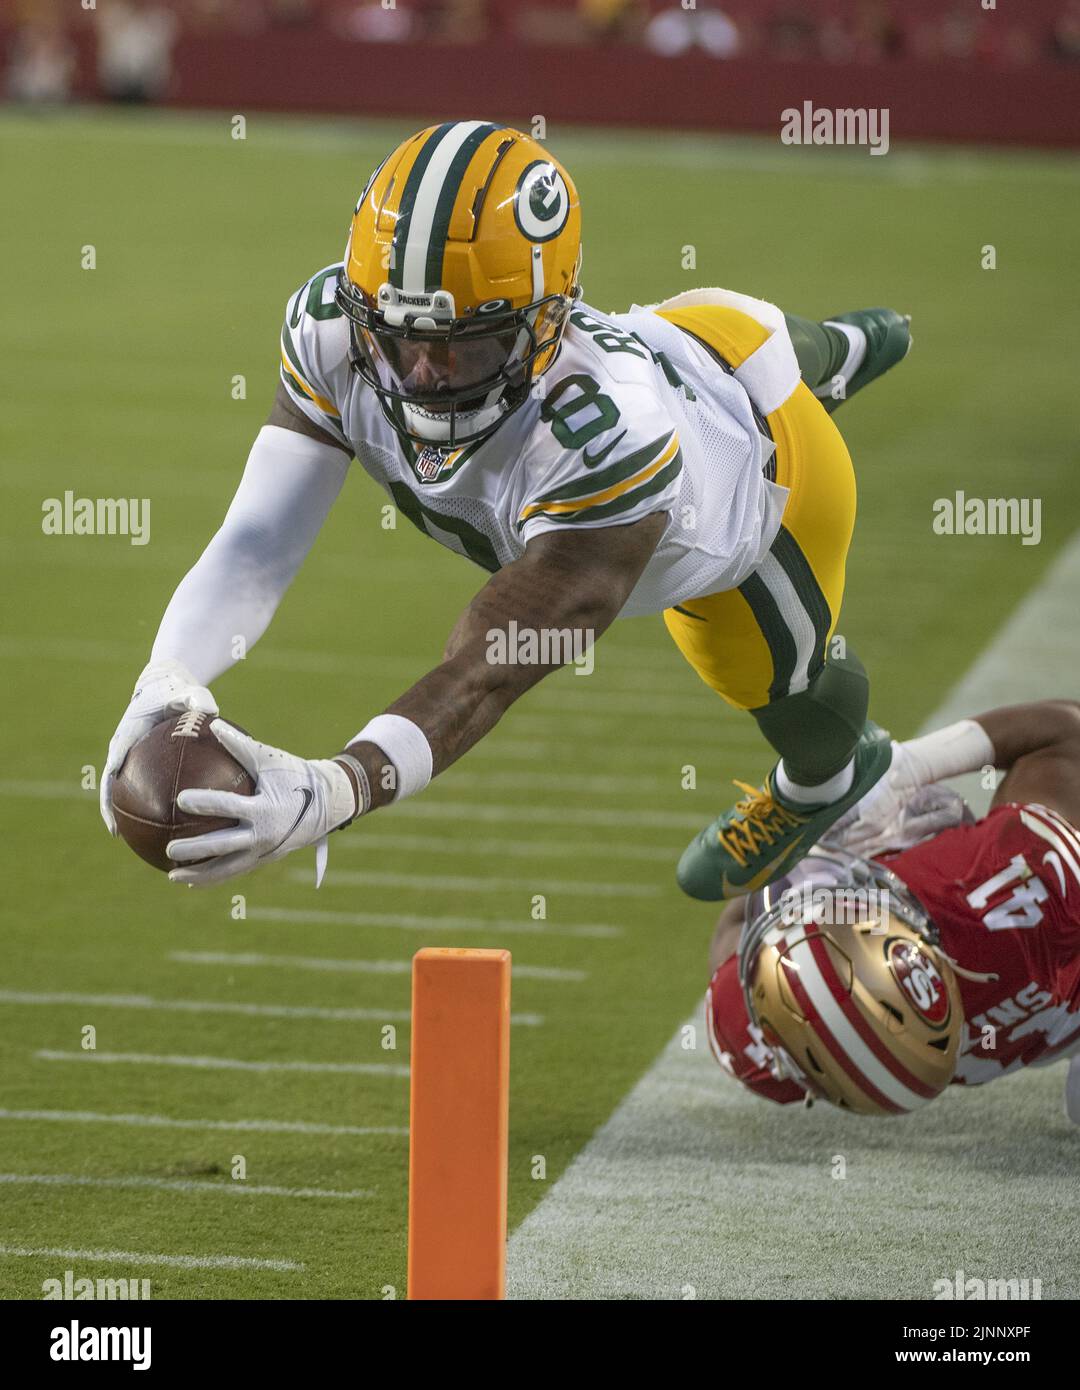 Santa Clara, USA. 13th Aug, 2022. Green Bay Packers wide receiver Amari Rodgers (8) dives for a fourth quarter TD with a pass from quaqrterback Danny Etling against the San Francisco 49ers at Levi's Stadium in Santa Clara, California on Friday, August 12, 2022. The 49ers defeated the Packers 28-21 in their first preseason game Photo by Terry Schmitt/UPI Credit: UPI/Alamy Live News Stock Photo